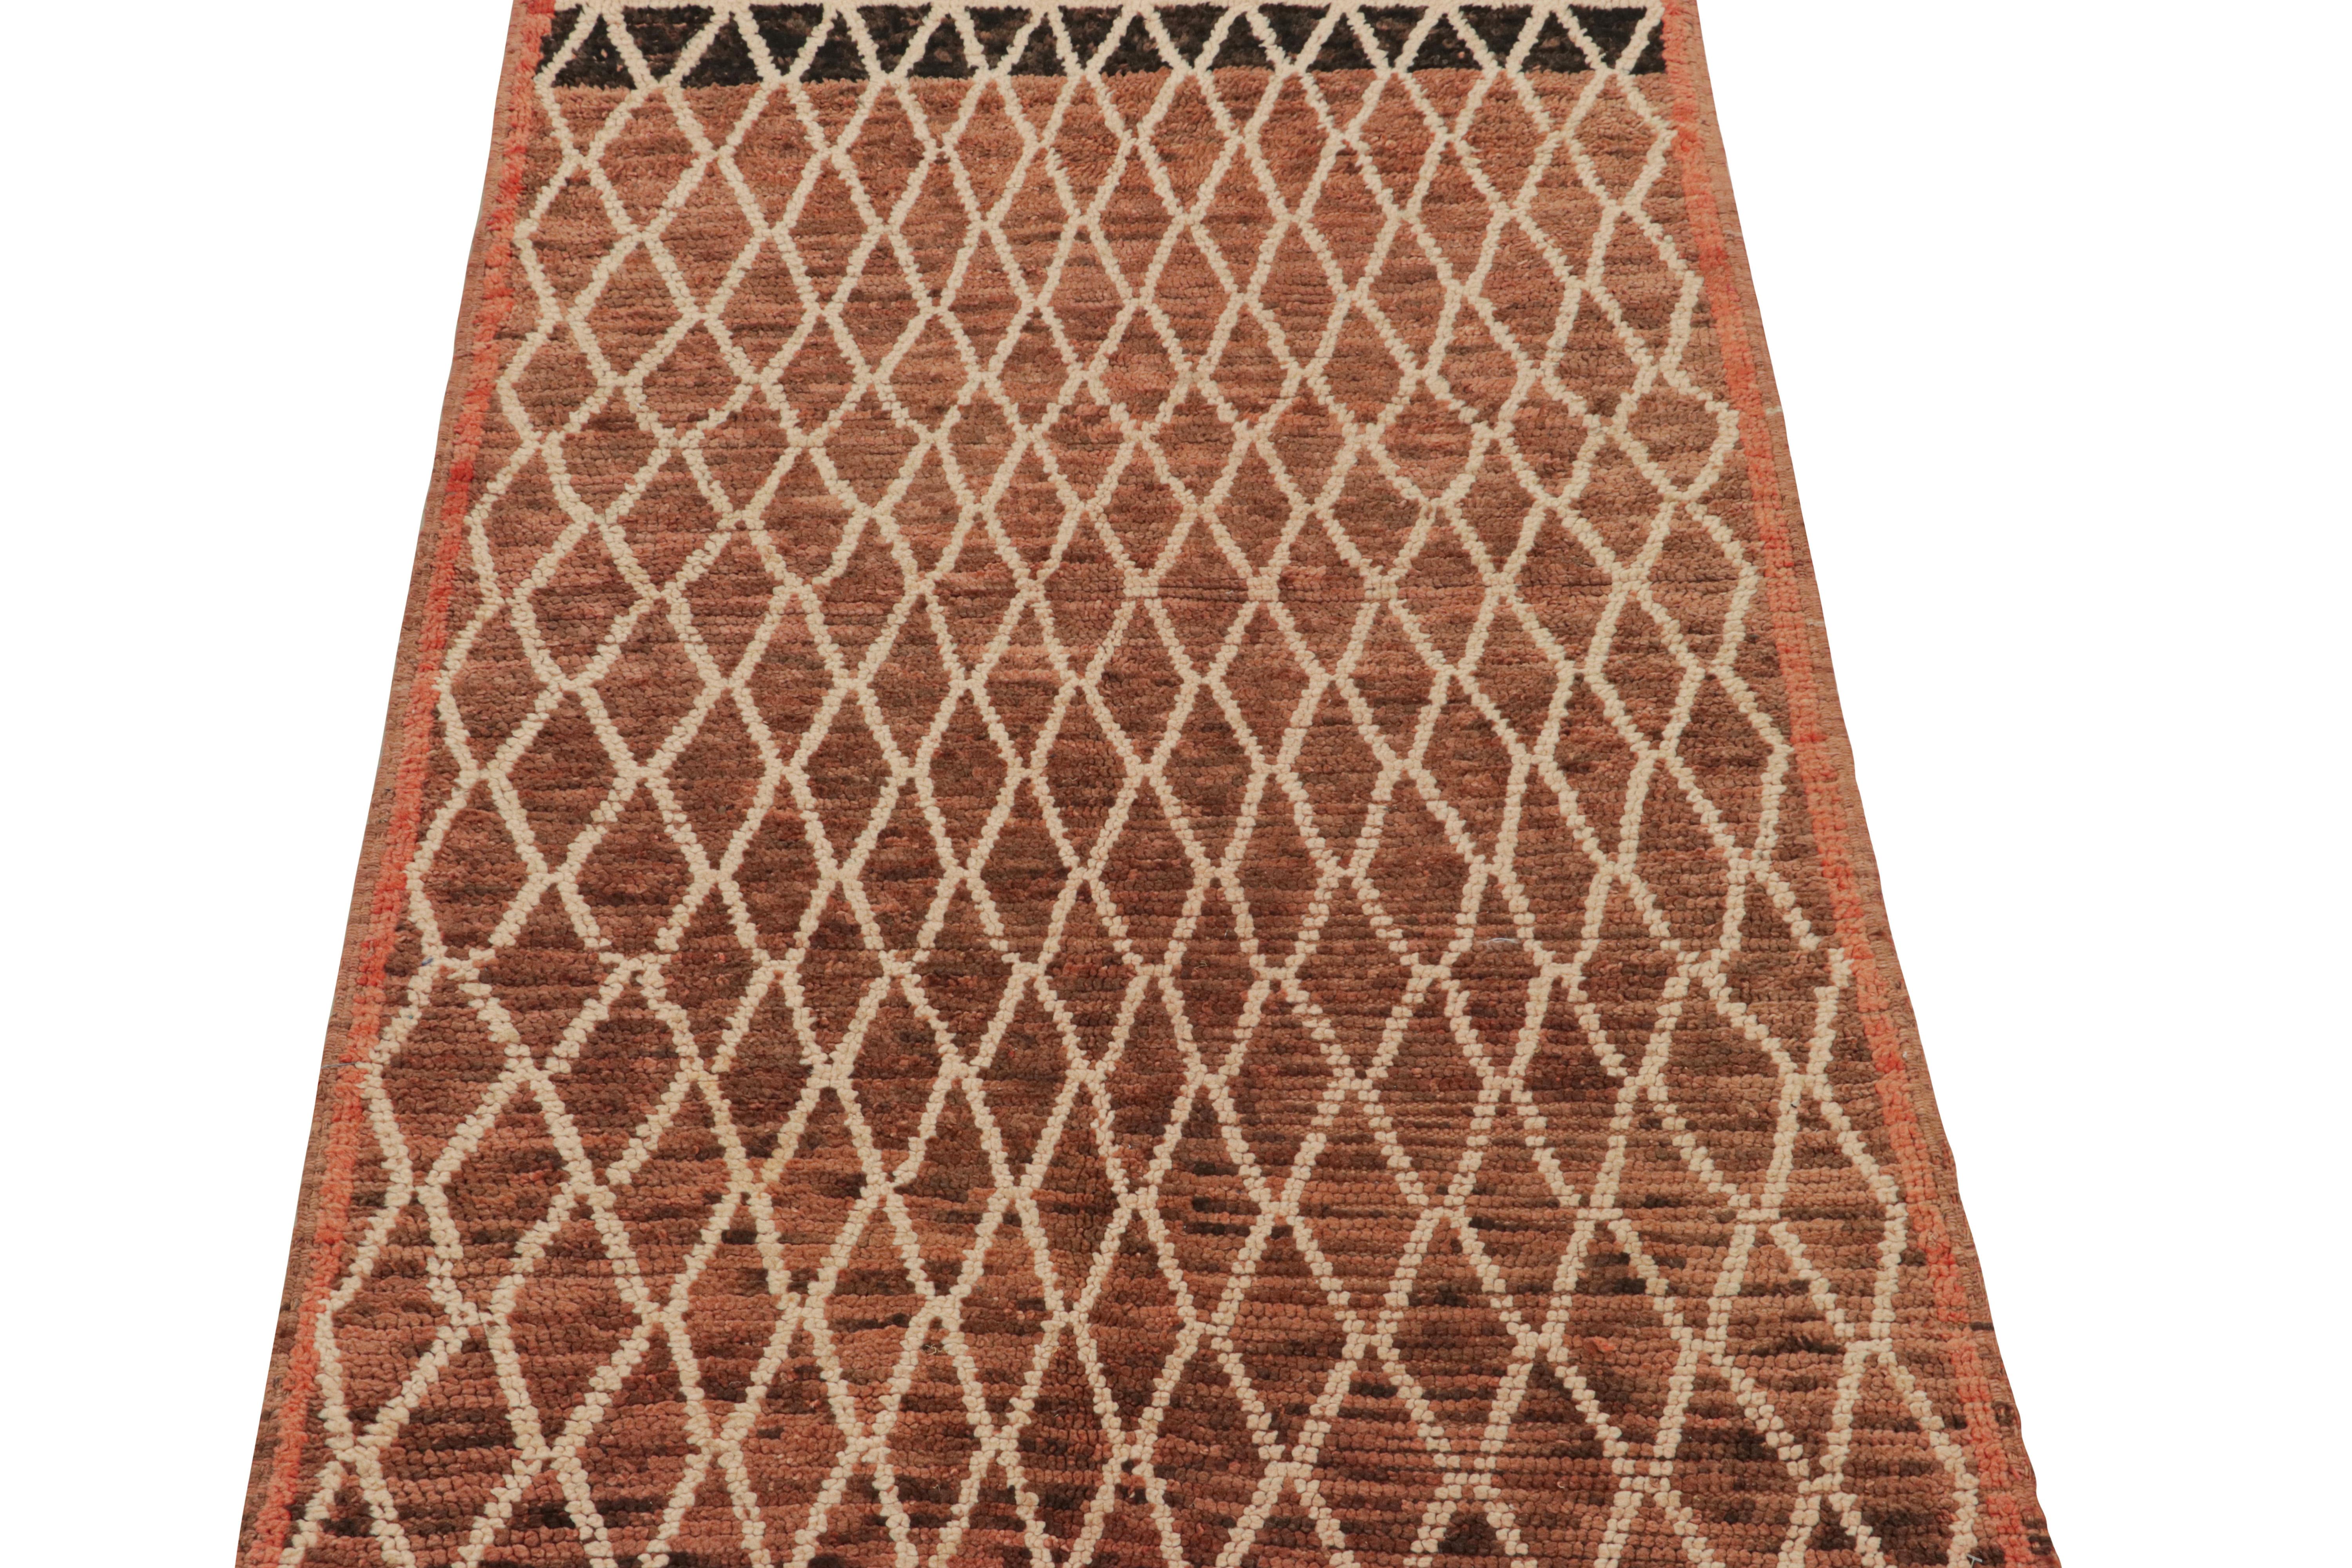 Tribal Antique Azilal Moroccan Rug in Brown with Beige Lozenge Pattern from Rug & Kilim For Sale